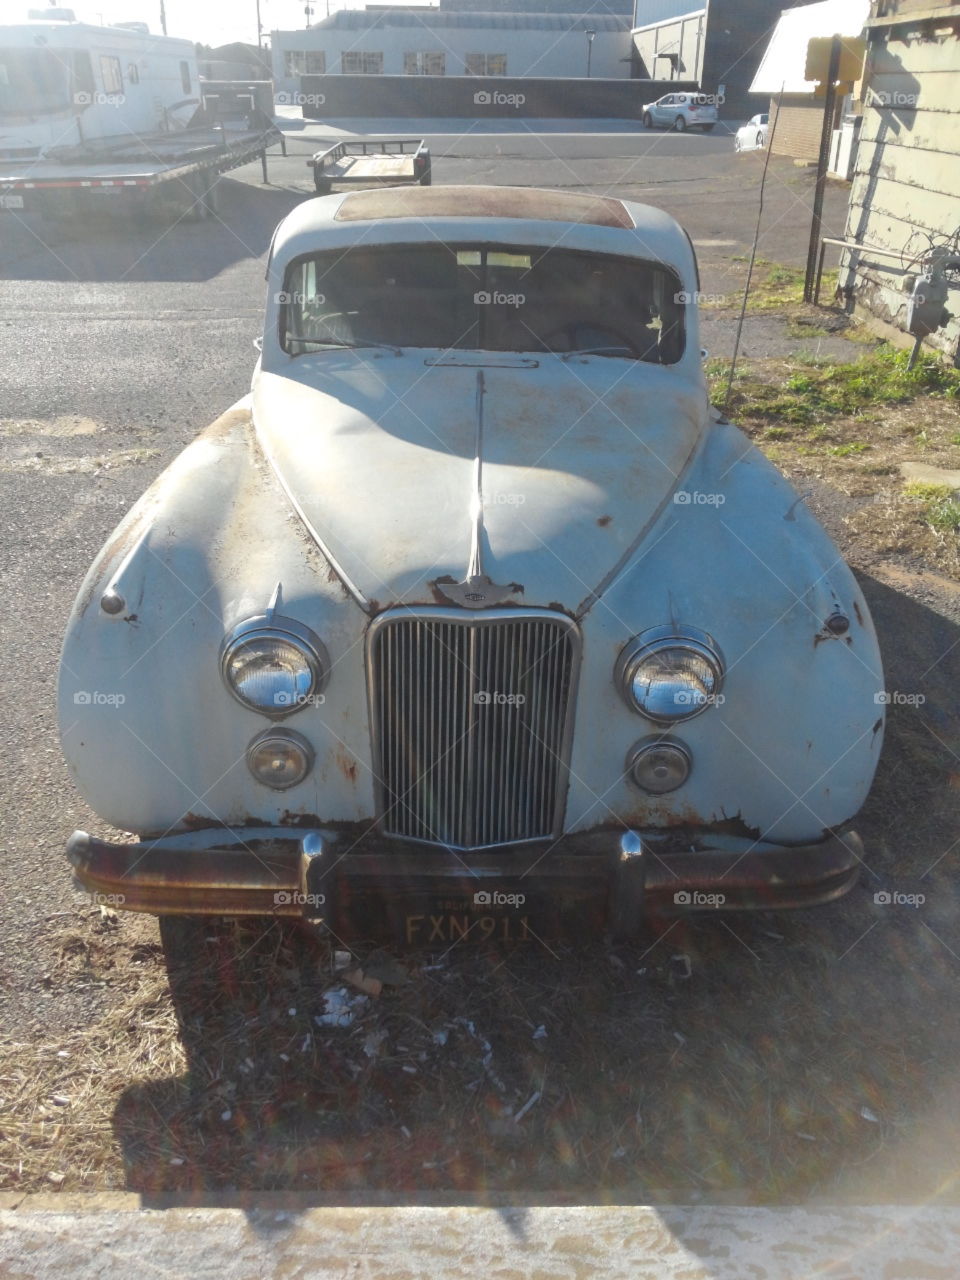 1950s Jaguar - sad to see abandoned/neglected